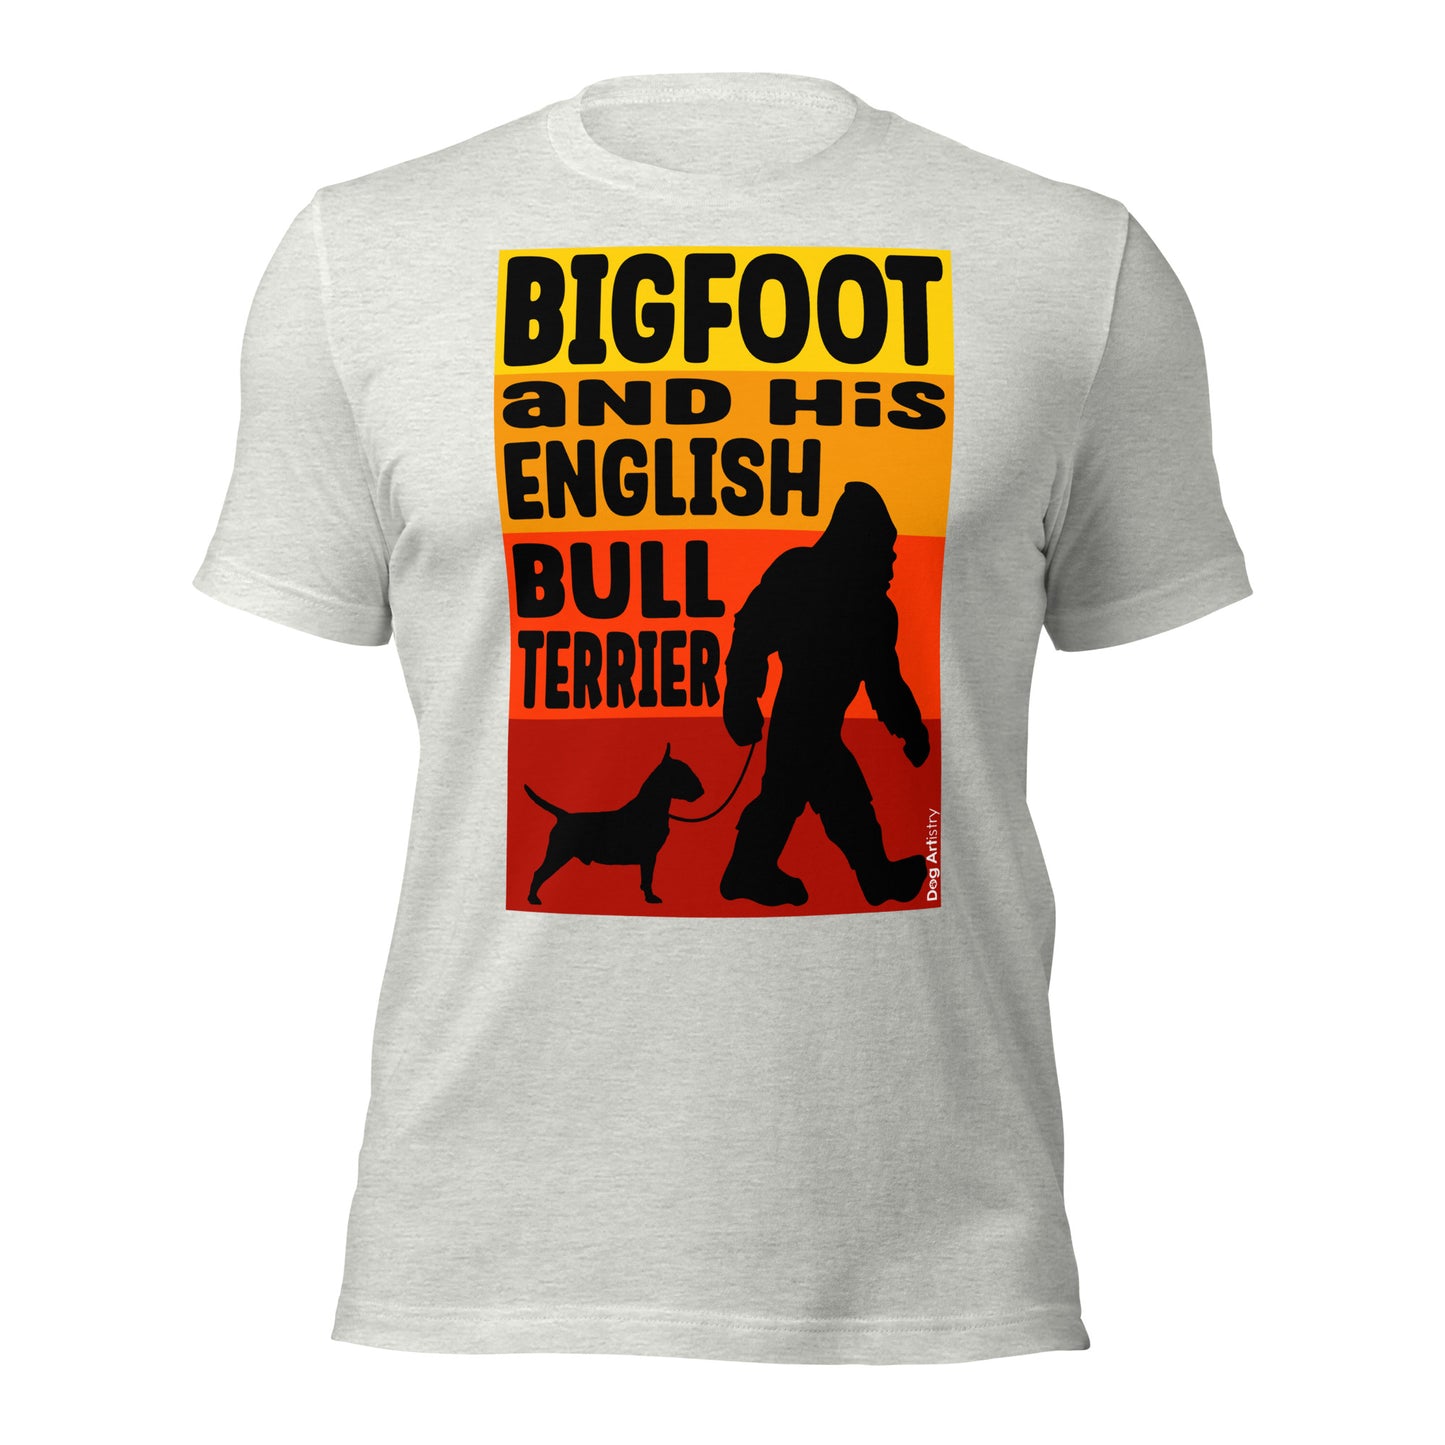 Bigfoot and his English Bull Terrier unisex ash t-shirt by Dog Artistry.